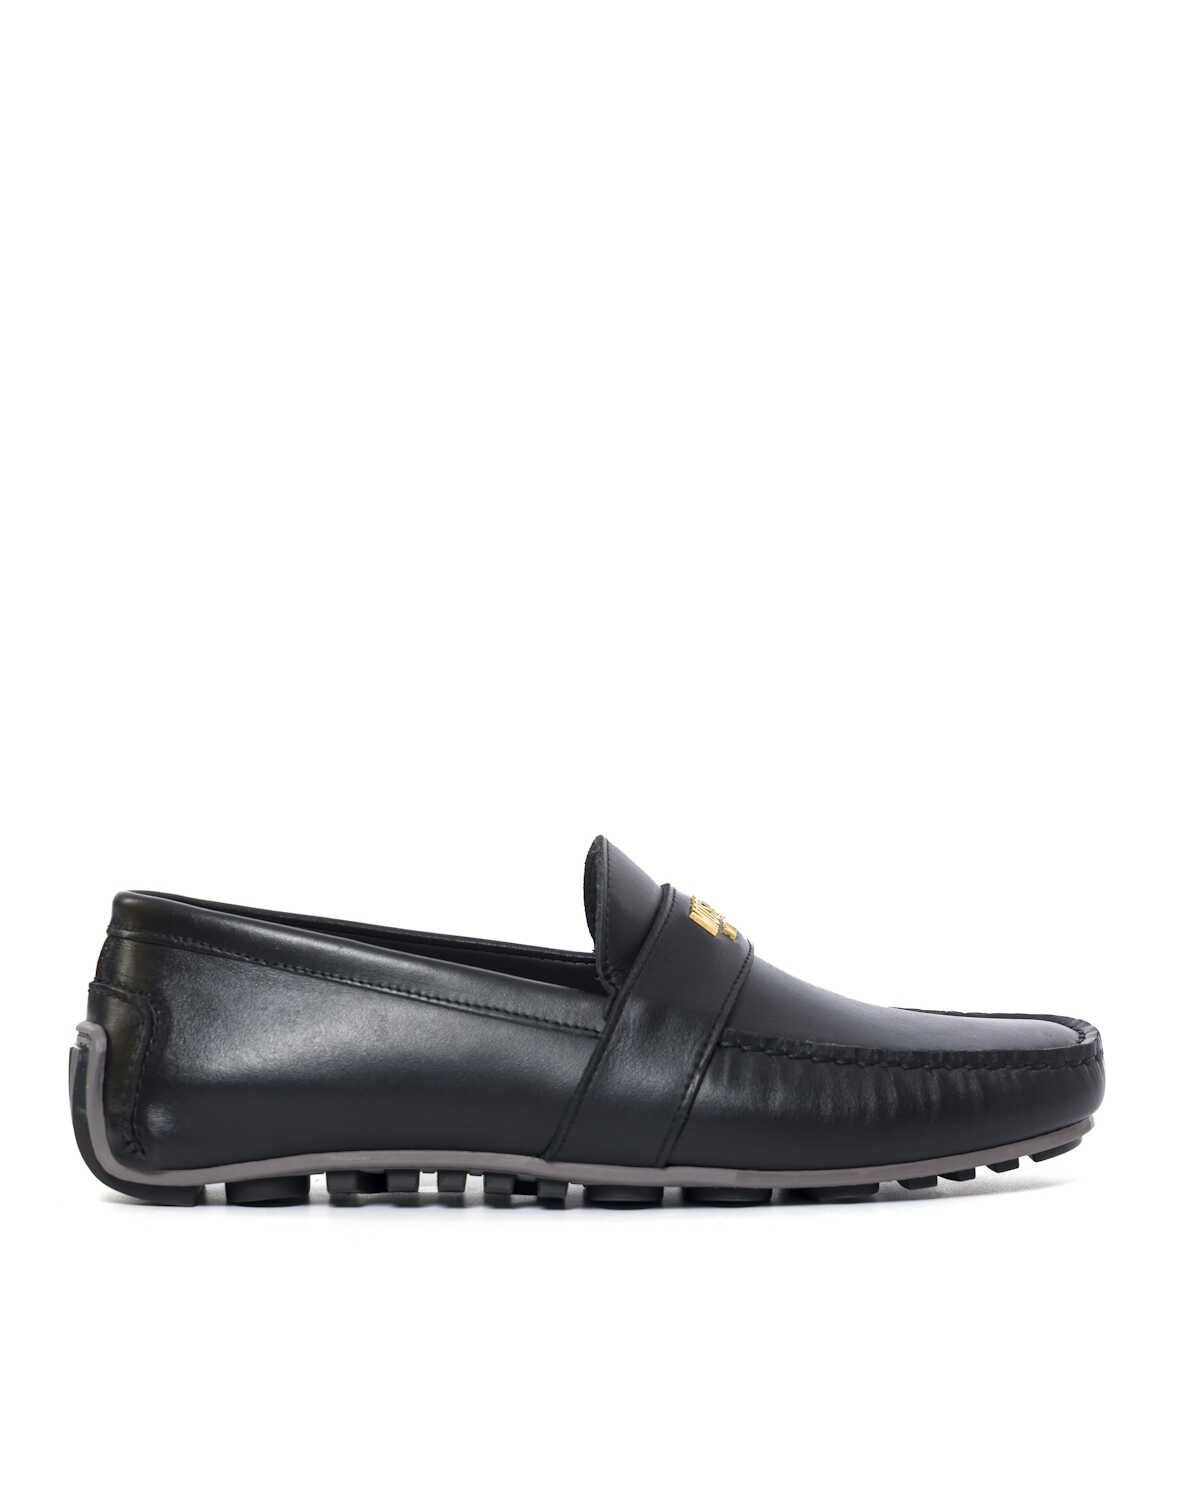 Moschino Metallic Letters Car Shoes NERO